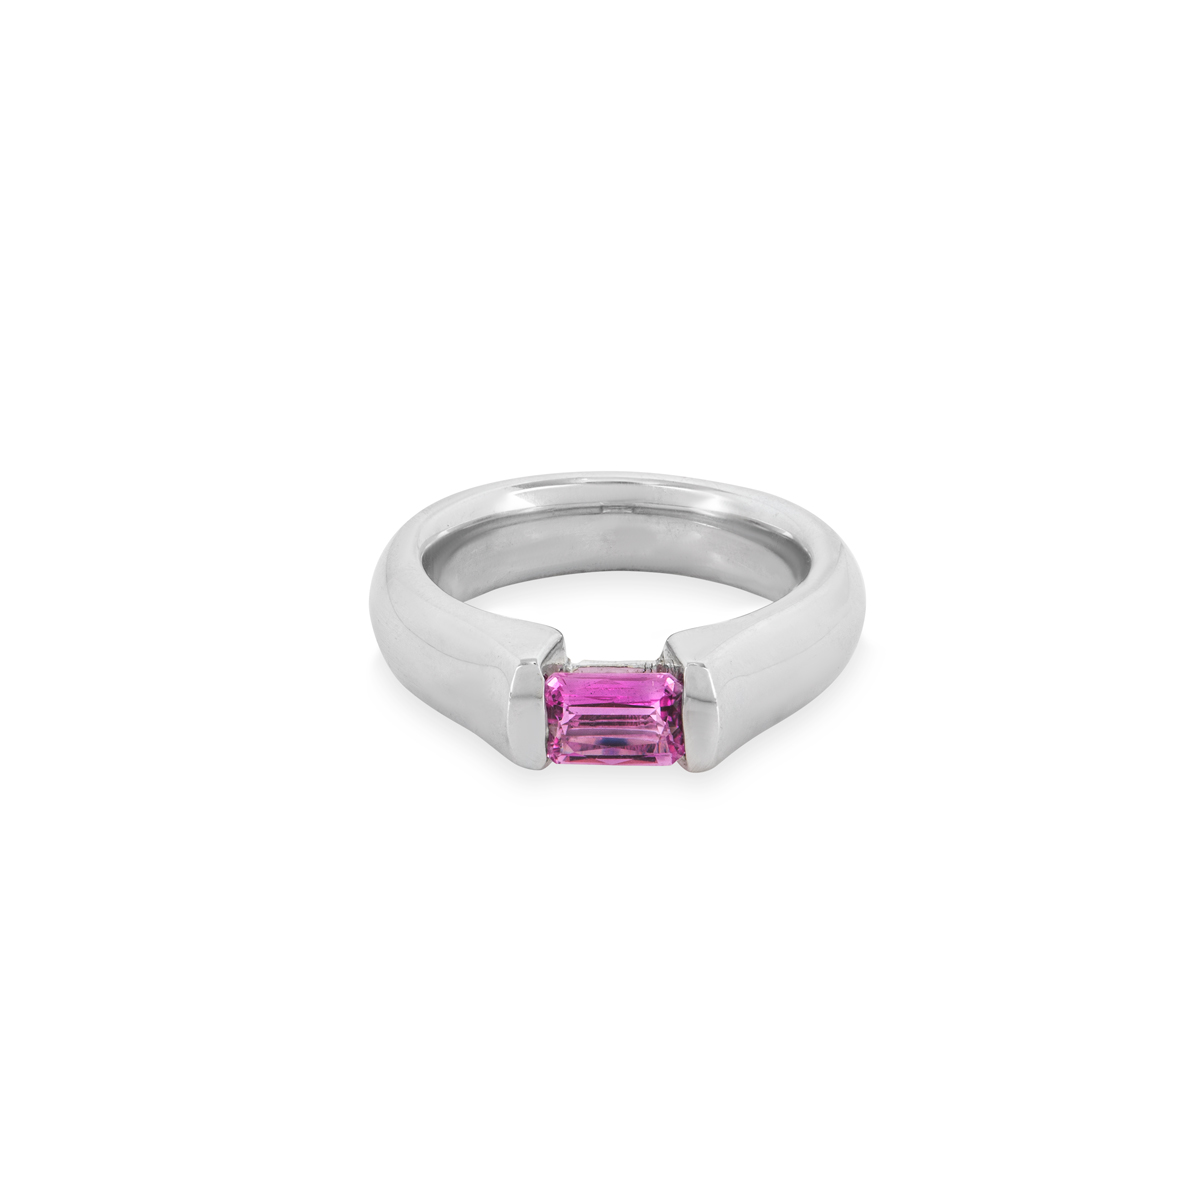 White Gold Pink Sapphire Ring 0.65ct